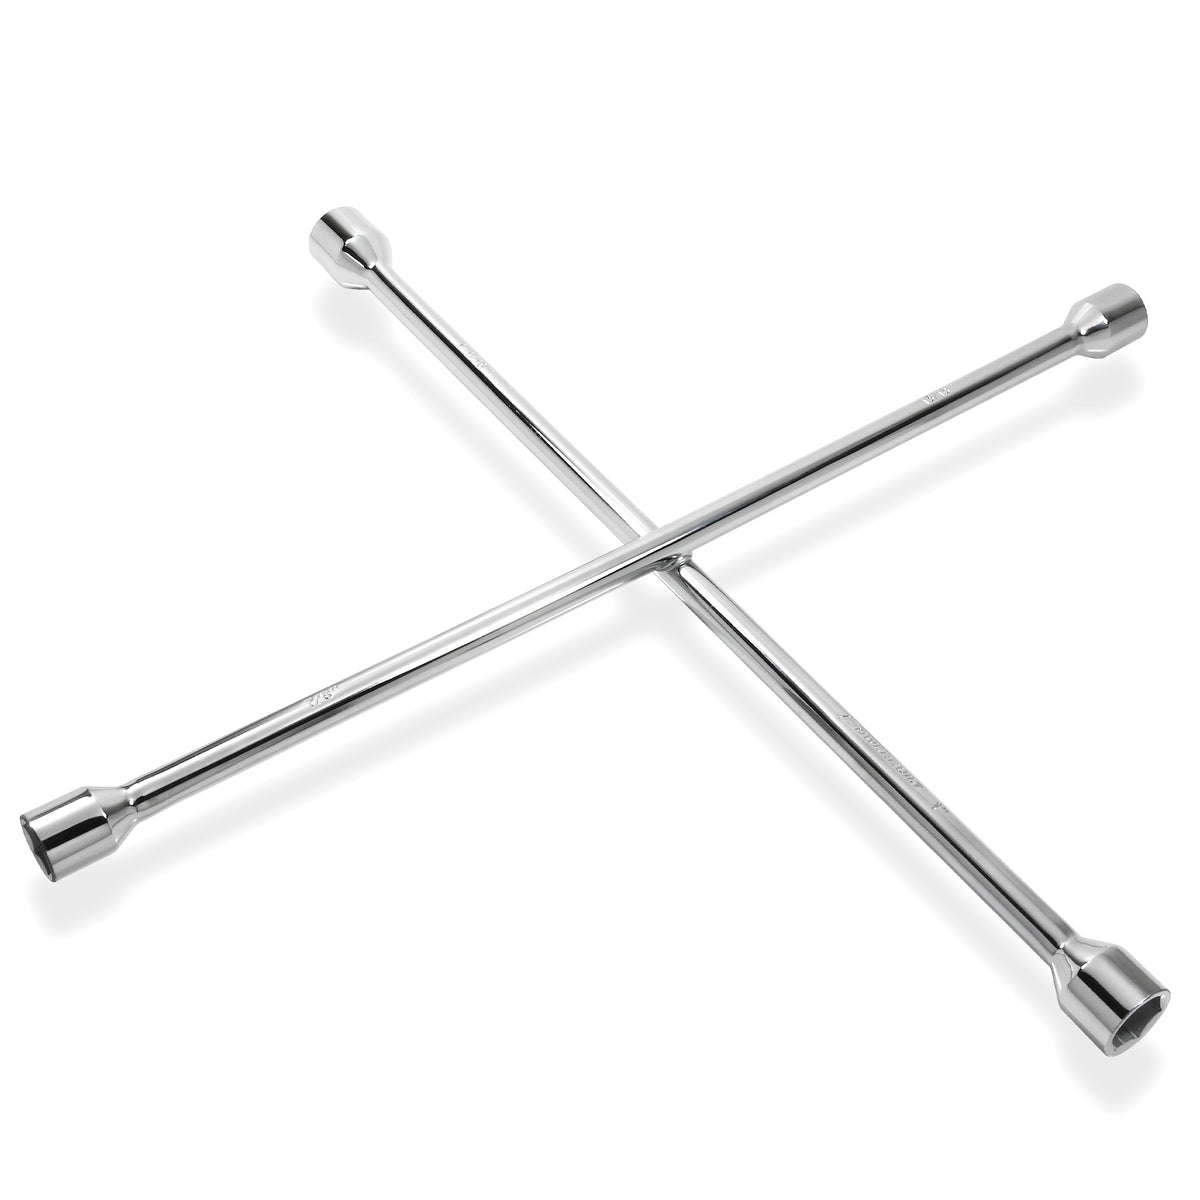 25 in. Four Way SAE Lug Wrench